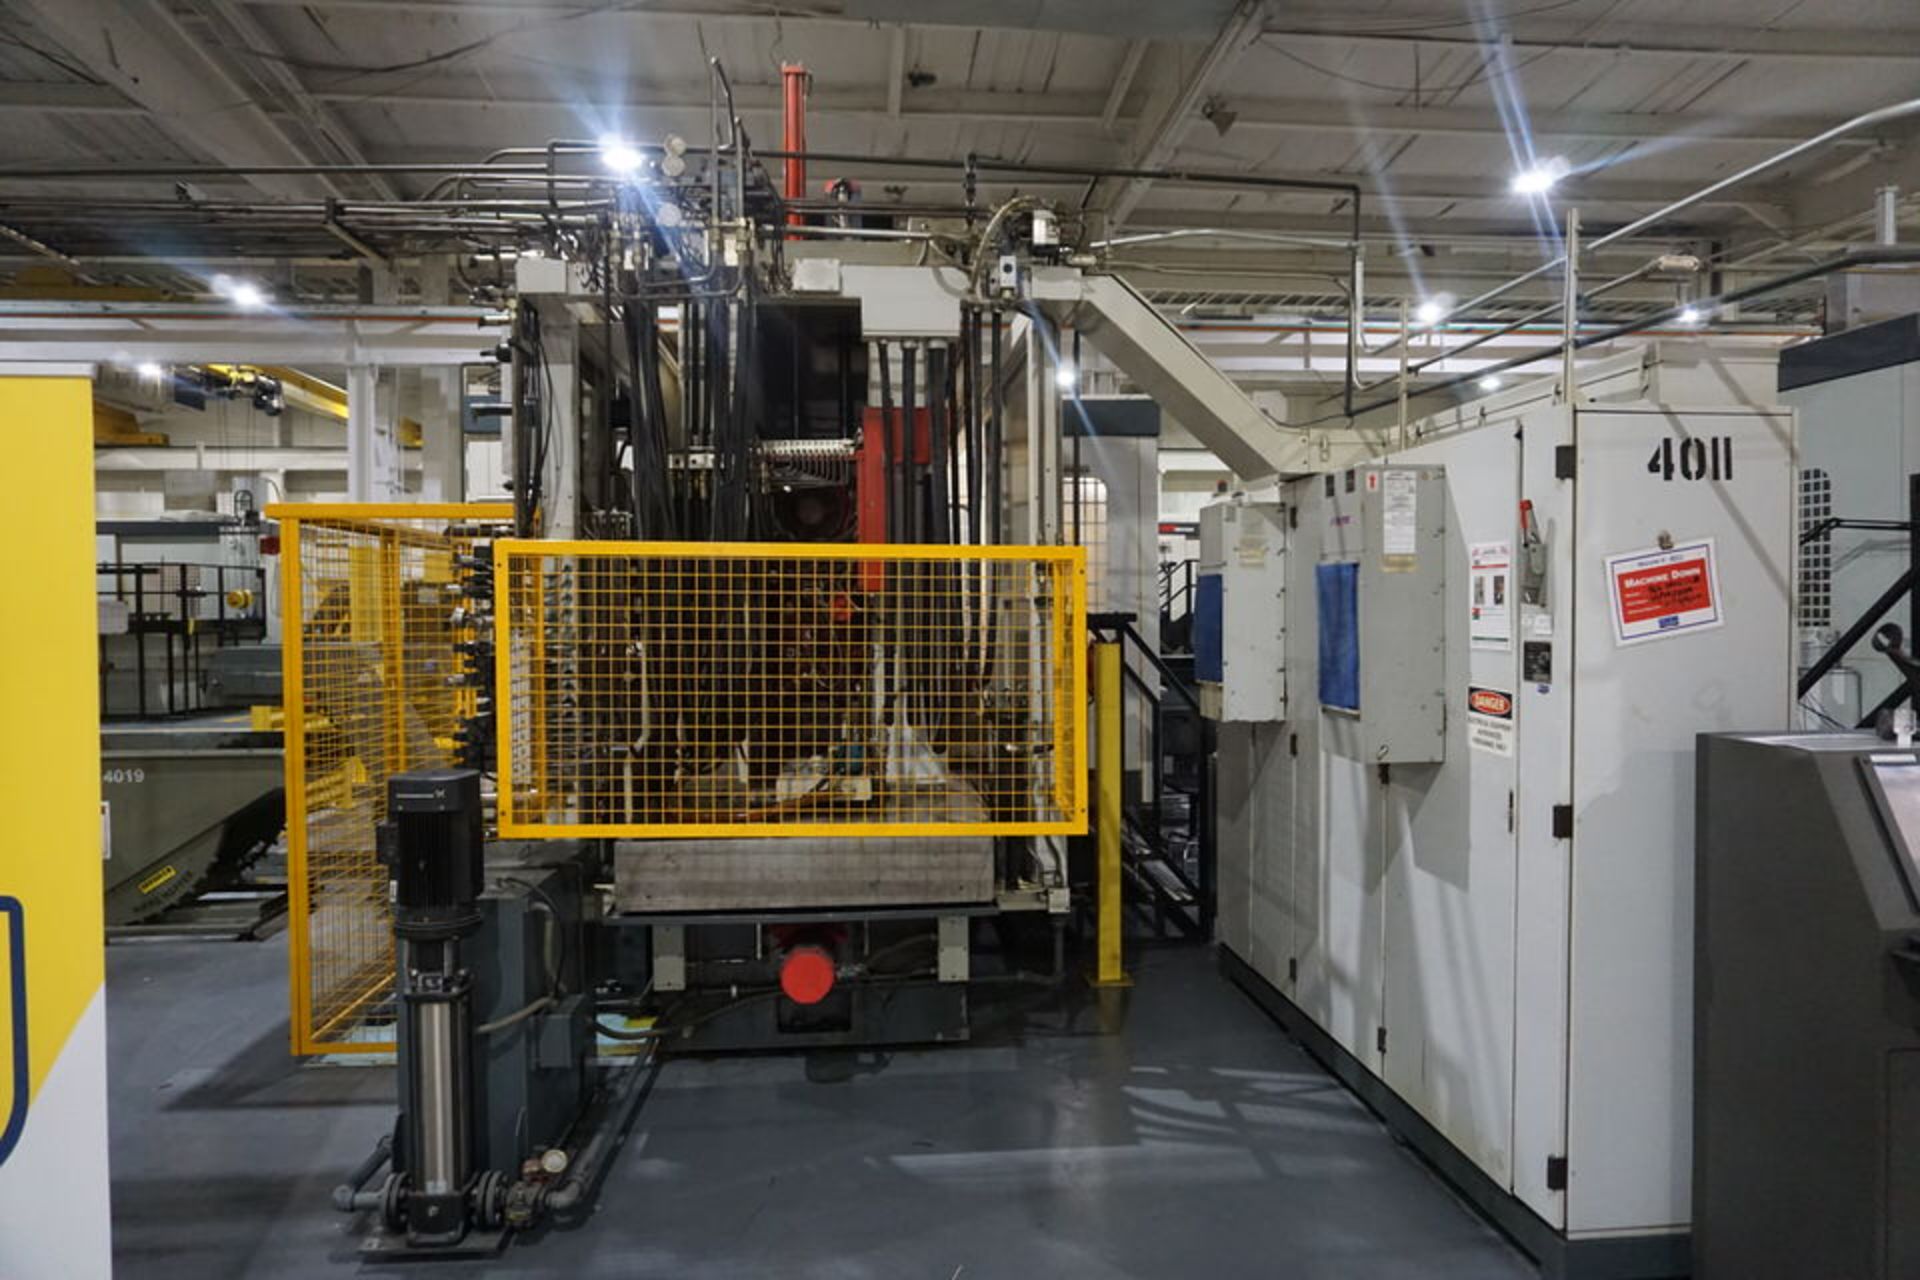 TREVISAN DS600/2000 5 AXIS HORIZONTAL MACHINING CENTER - Image 8 of 8